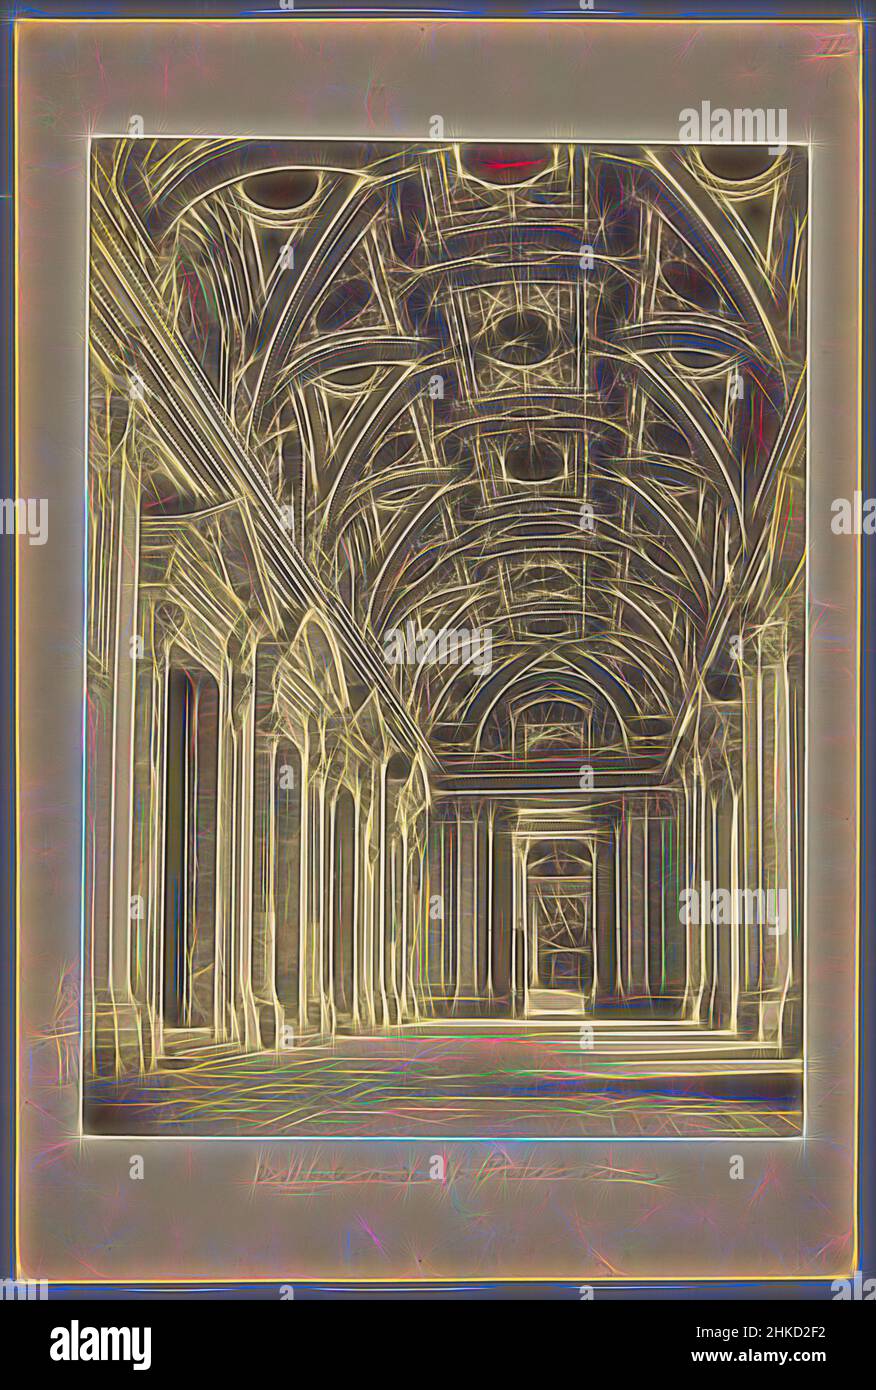 Inspired by Interior of the vestibule of St. Peter's Basilica in Rome, Gustave Eugène Chauffourier, Sint-Pietersbasiliek, c. 1875 - c. 1900, albumen print, height 378 mm × width 271 mm, Reimagined by Artotop. Classic art reinvented with a modern twist. Design of warm cheerful glowing of brightness and light ray radiance. Photography inspired by surrealism and futurism, embracing dynamic energy of modern technology, movement, speed and revolutionize culture Stock Photo